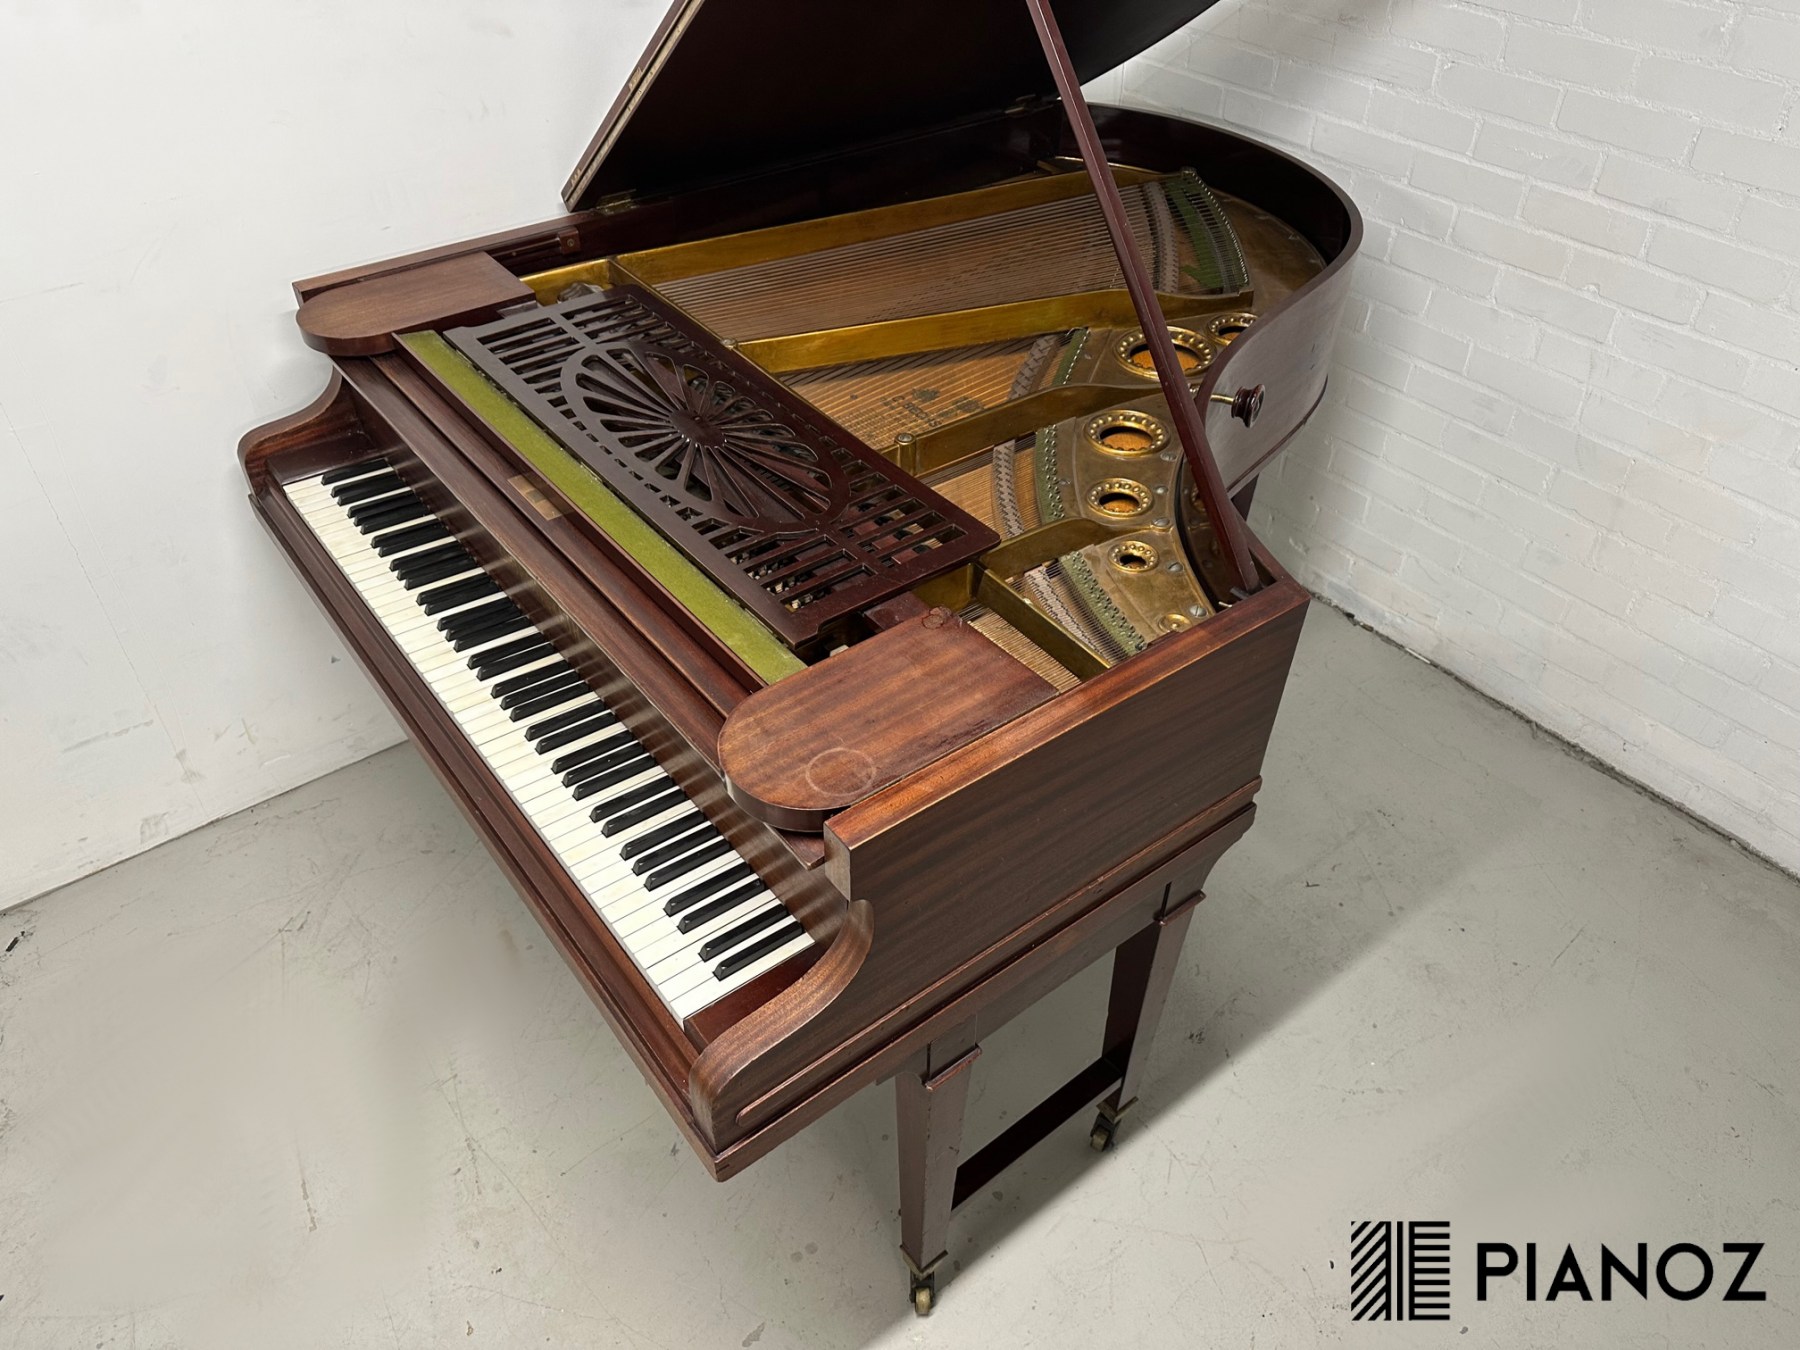 Bechstein Model A Baby Grand Piano piano for sale in UK